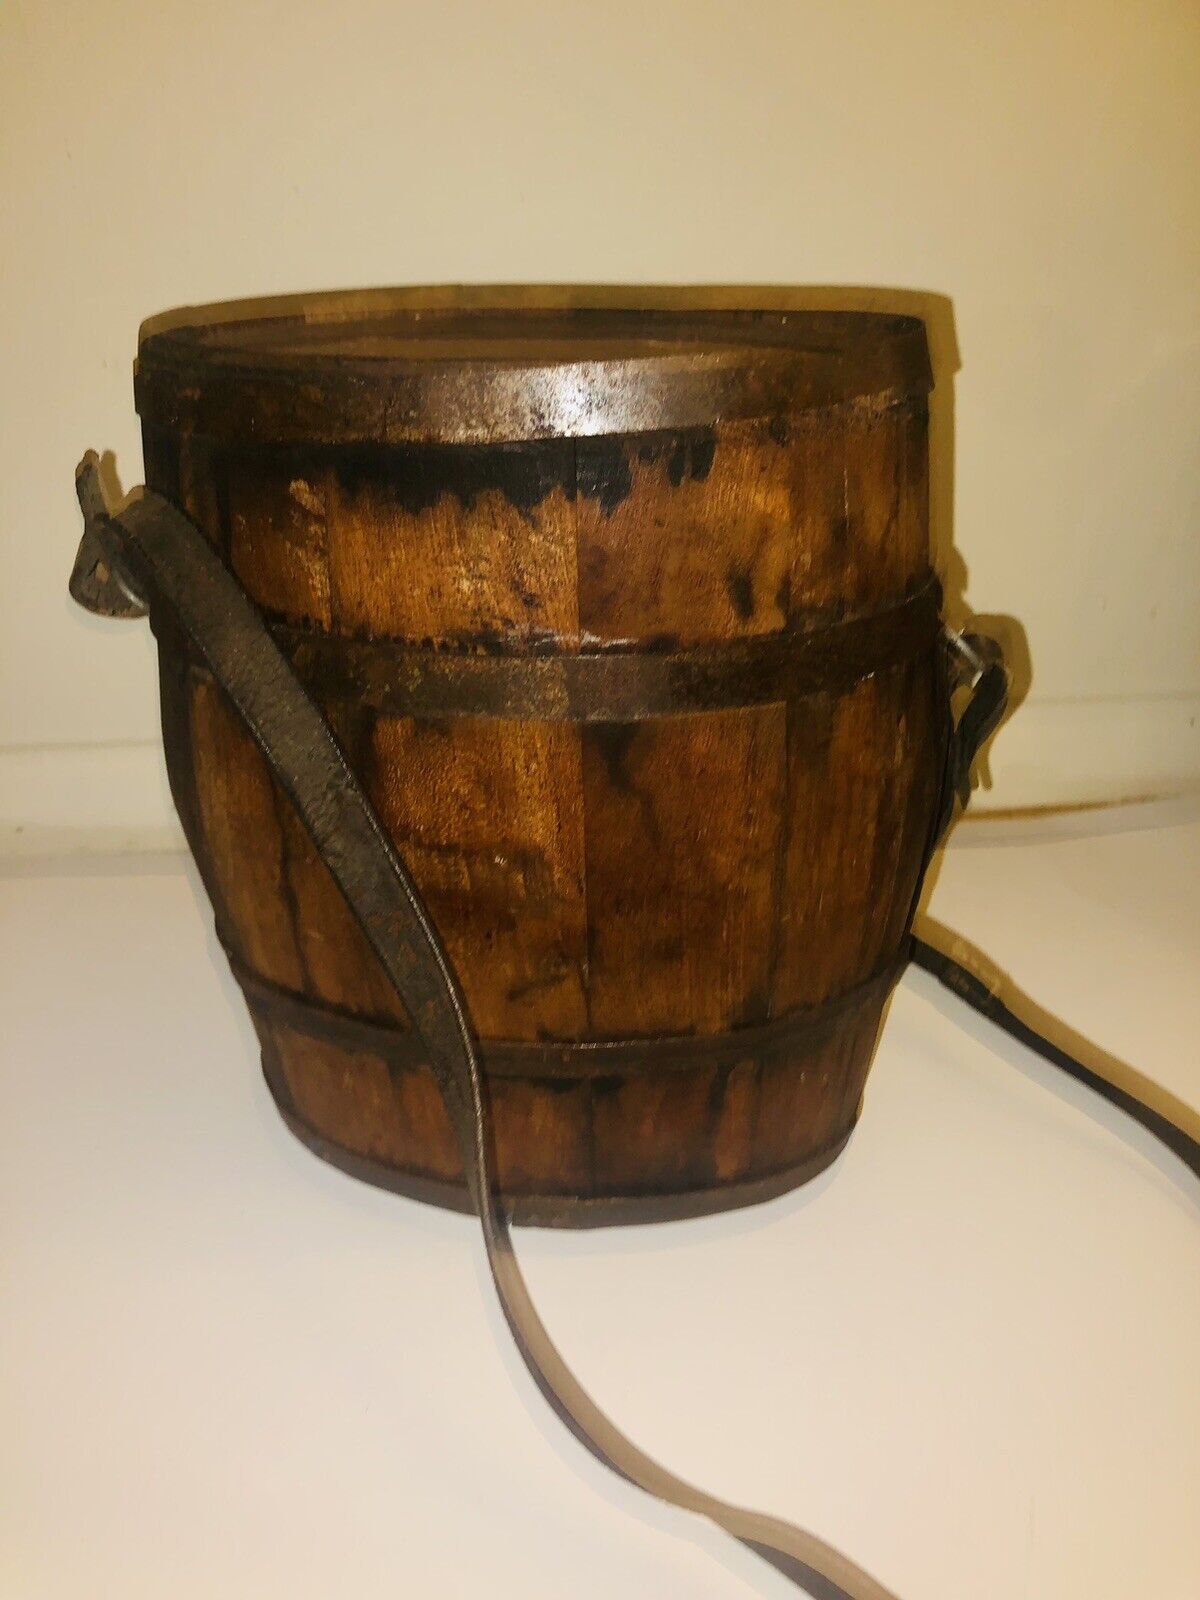 Oval Revolutionary War Wood canteen, military style.Early 18th century. American